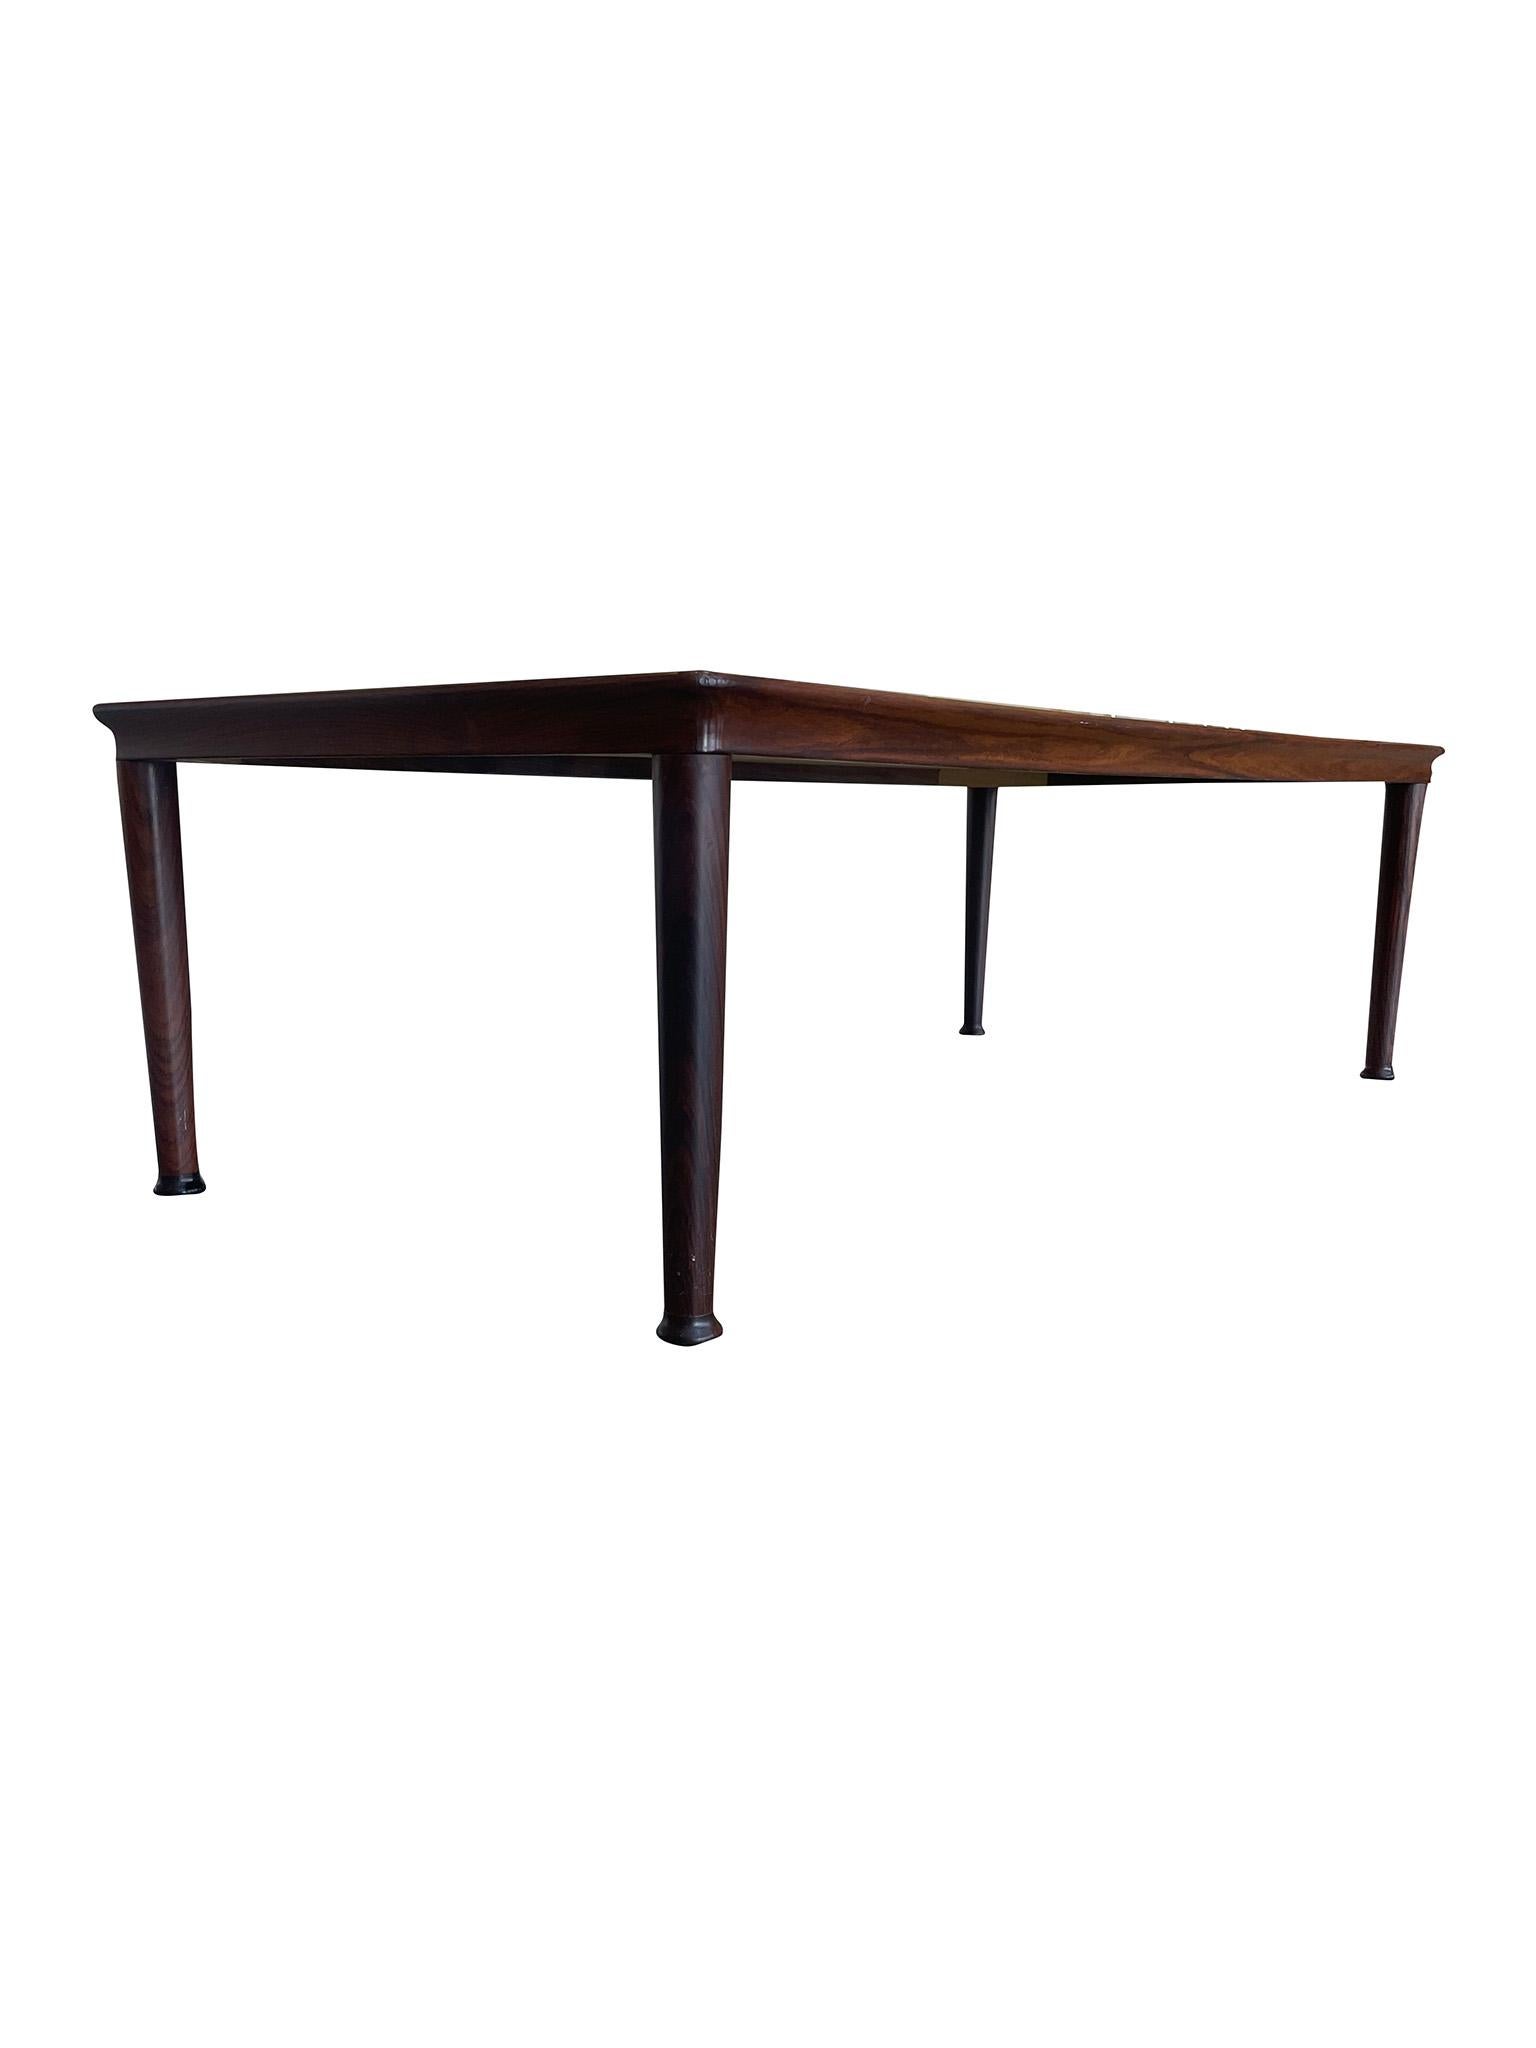 Versatile midcentury Danish Modern Coffee Table manufactured by Vejle Møbelfabrik Stole. Constructed in Rosewood, this coffee table is a lovely example of Danish craftsmanship and design ideals. Characterized by its minimal profile, emphasis on the